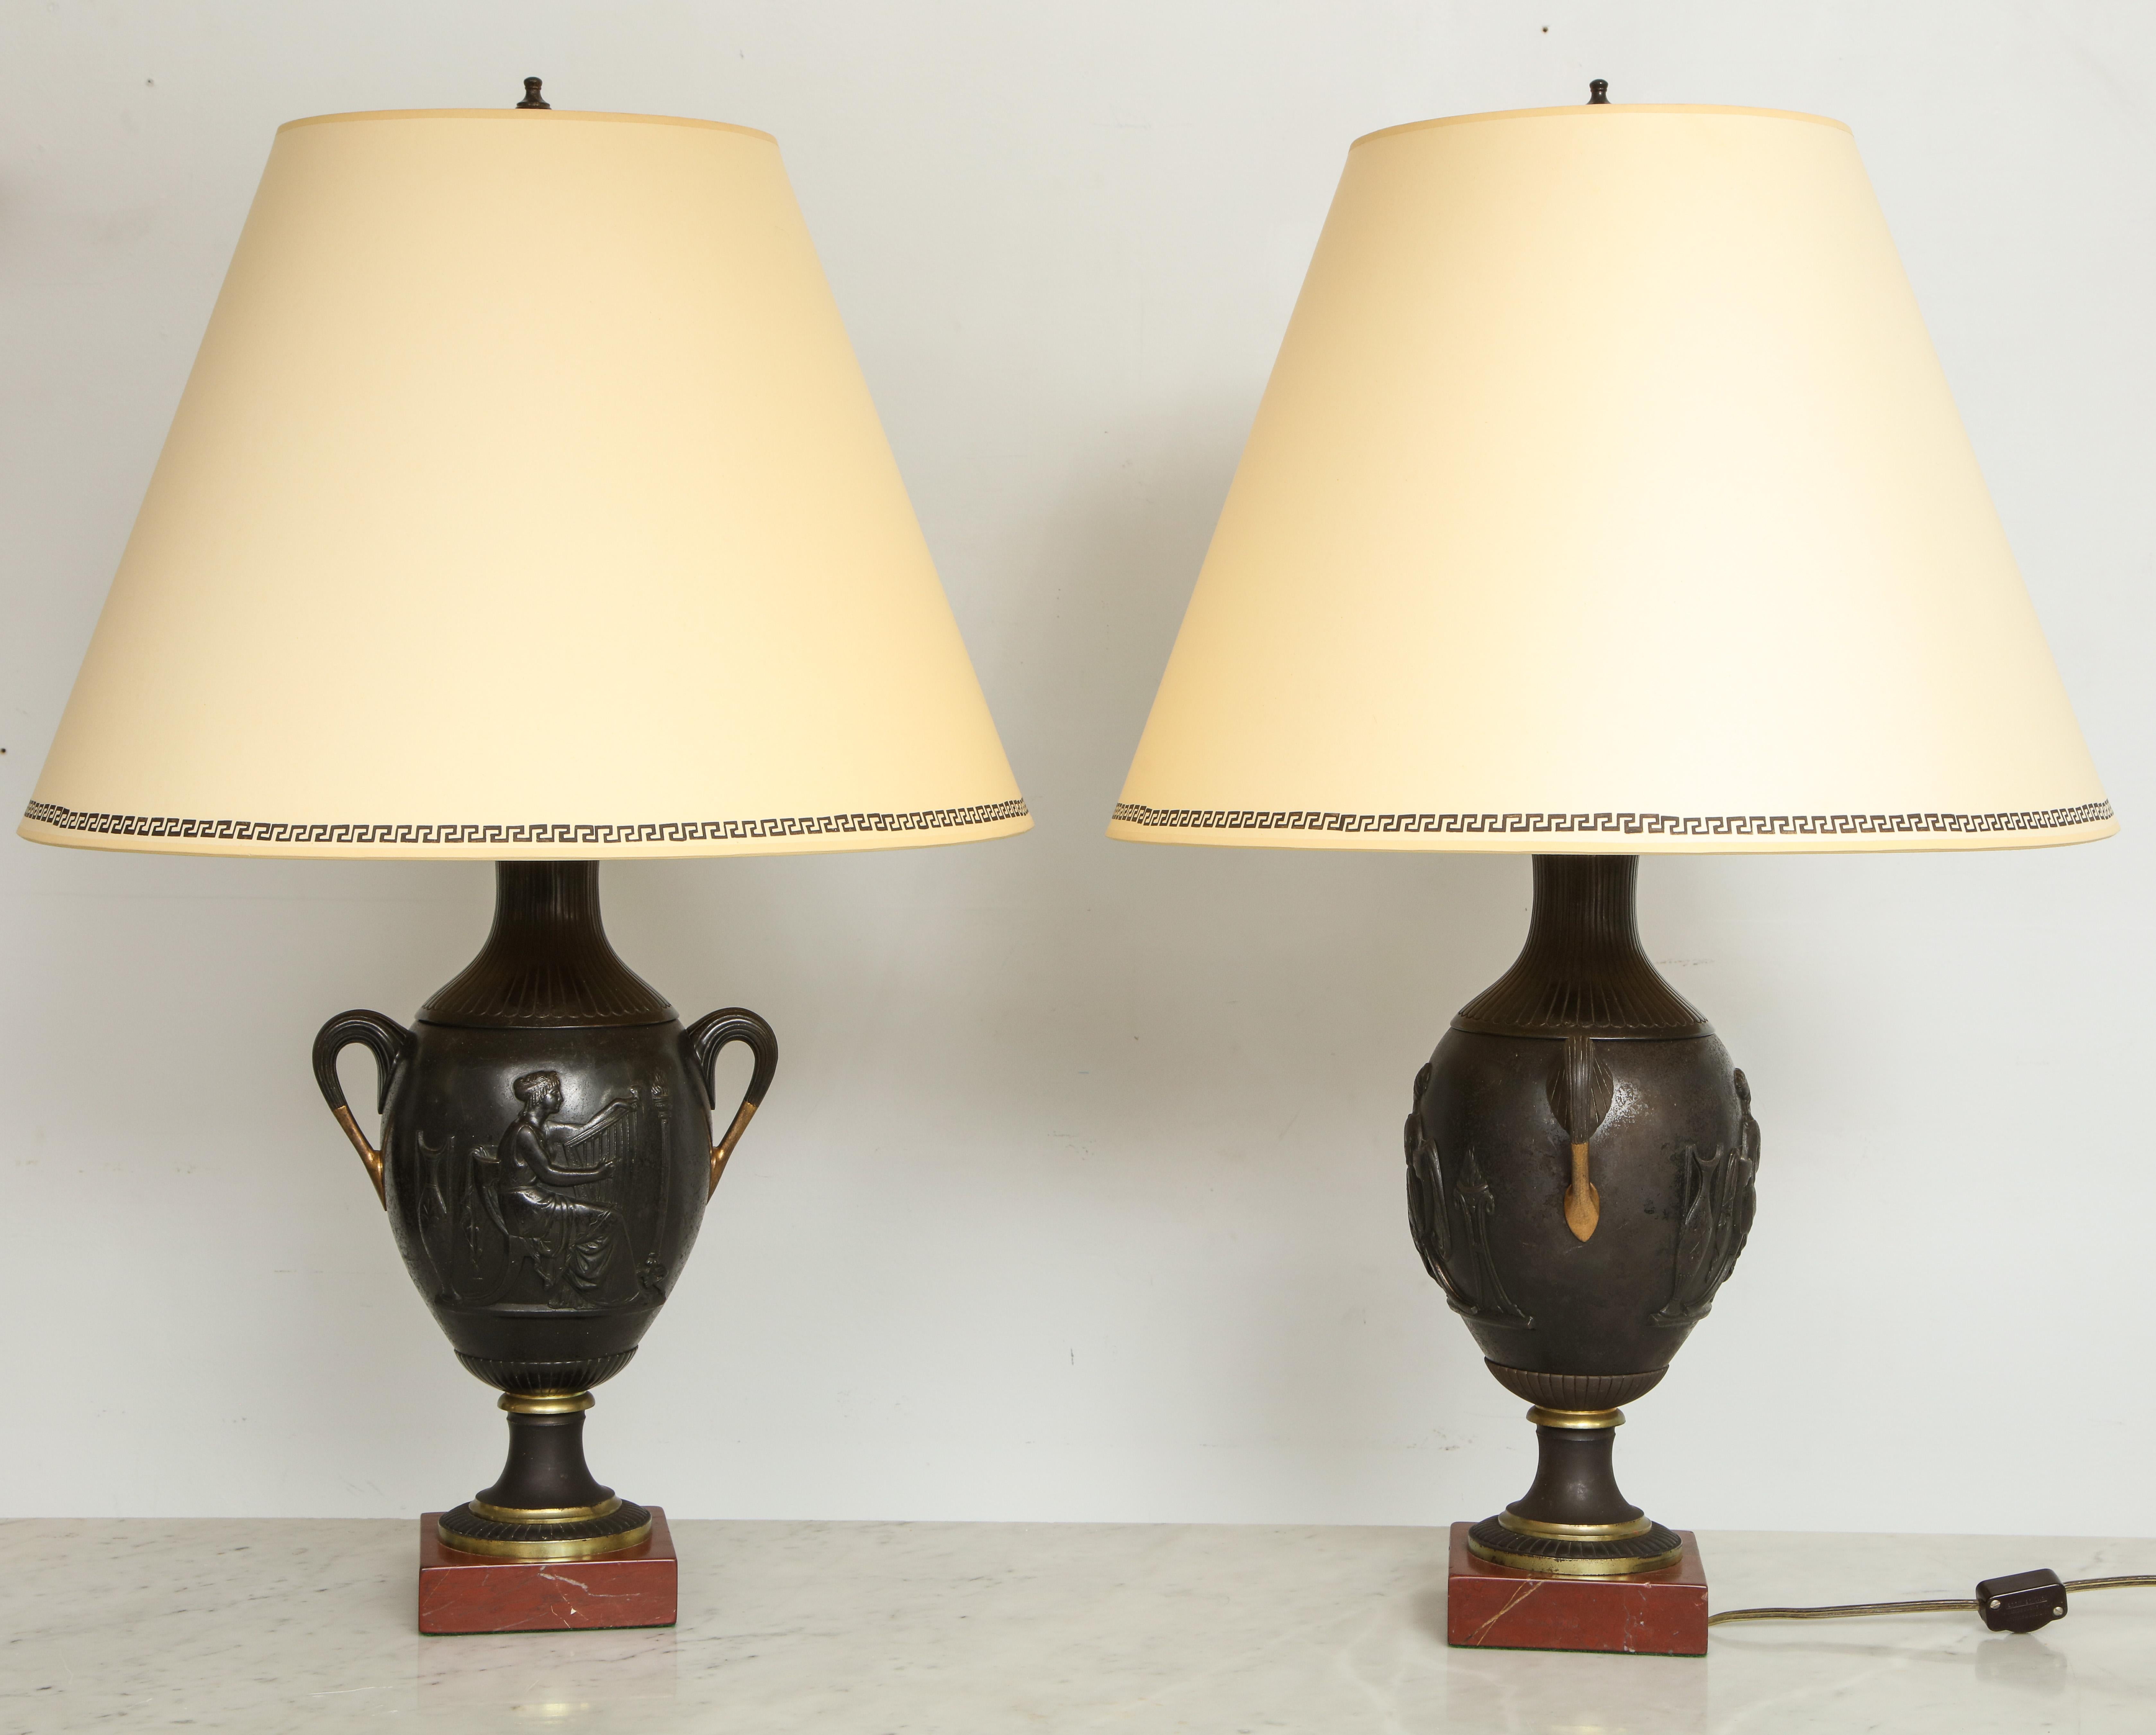 Pair of antique French bronze urn lamps in the neoclassic manner.
Please note the list price is for this set of 2 lamps. 